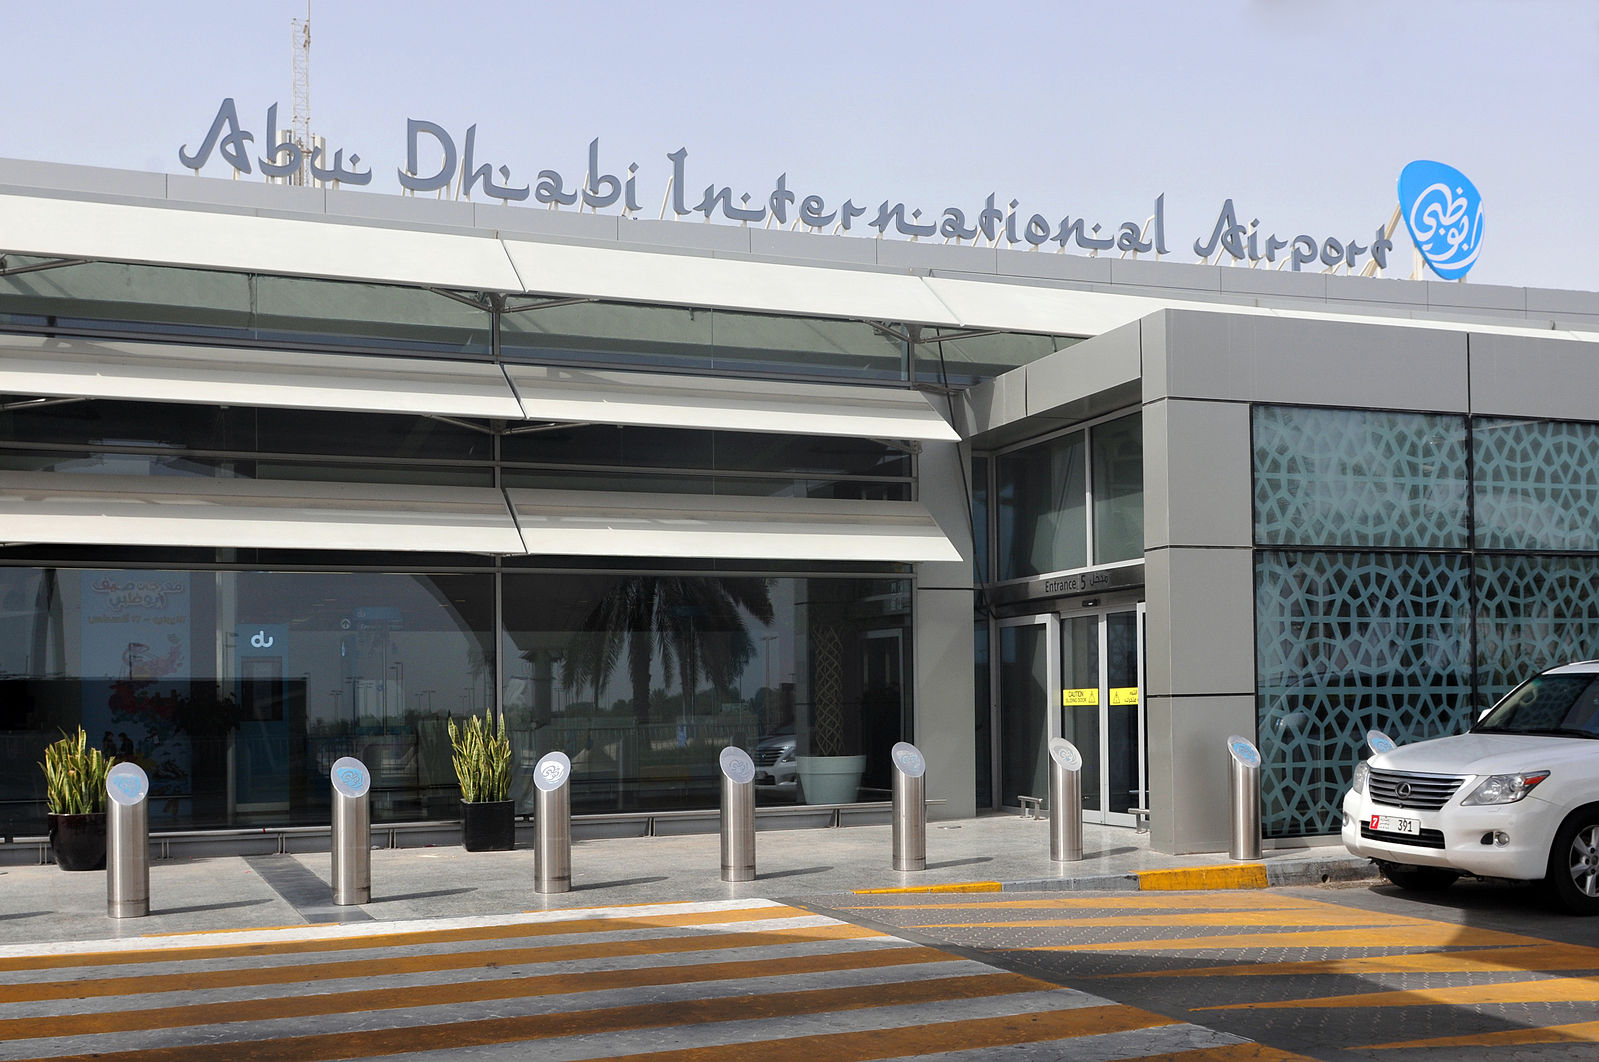 Abu Dhabi International Airport is the main airport serving the Emirate of Abu Dhabi.